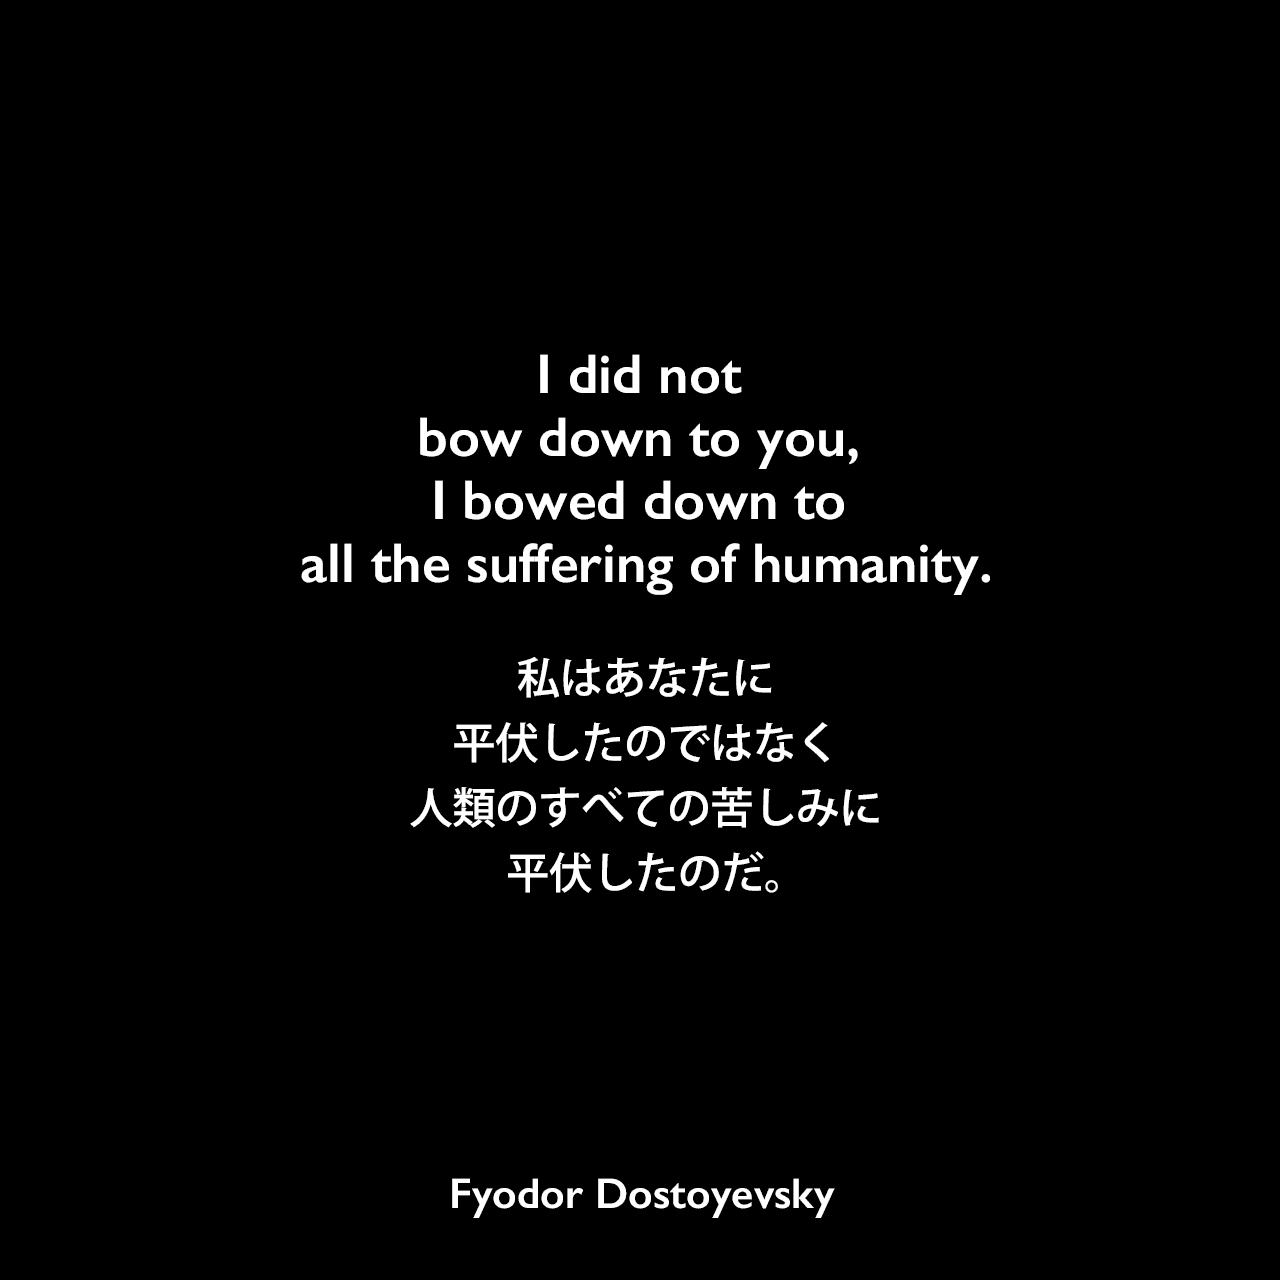 I did not bow down to you, I bowed down to all the suffering of humanity.私はあなたに平伏したのではなく、人類のすべての苦しみに平伏したのだ。Fyodor Dostoyevsky